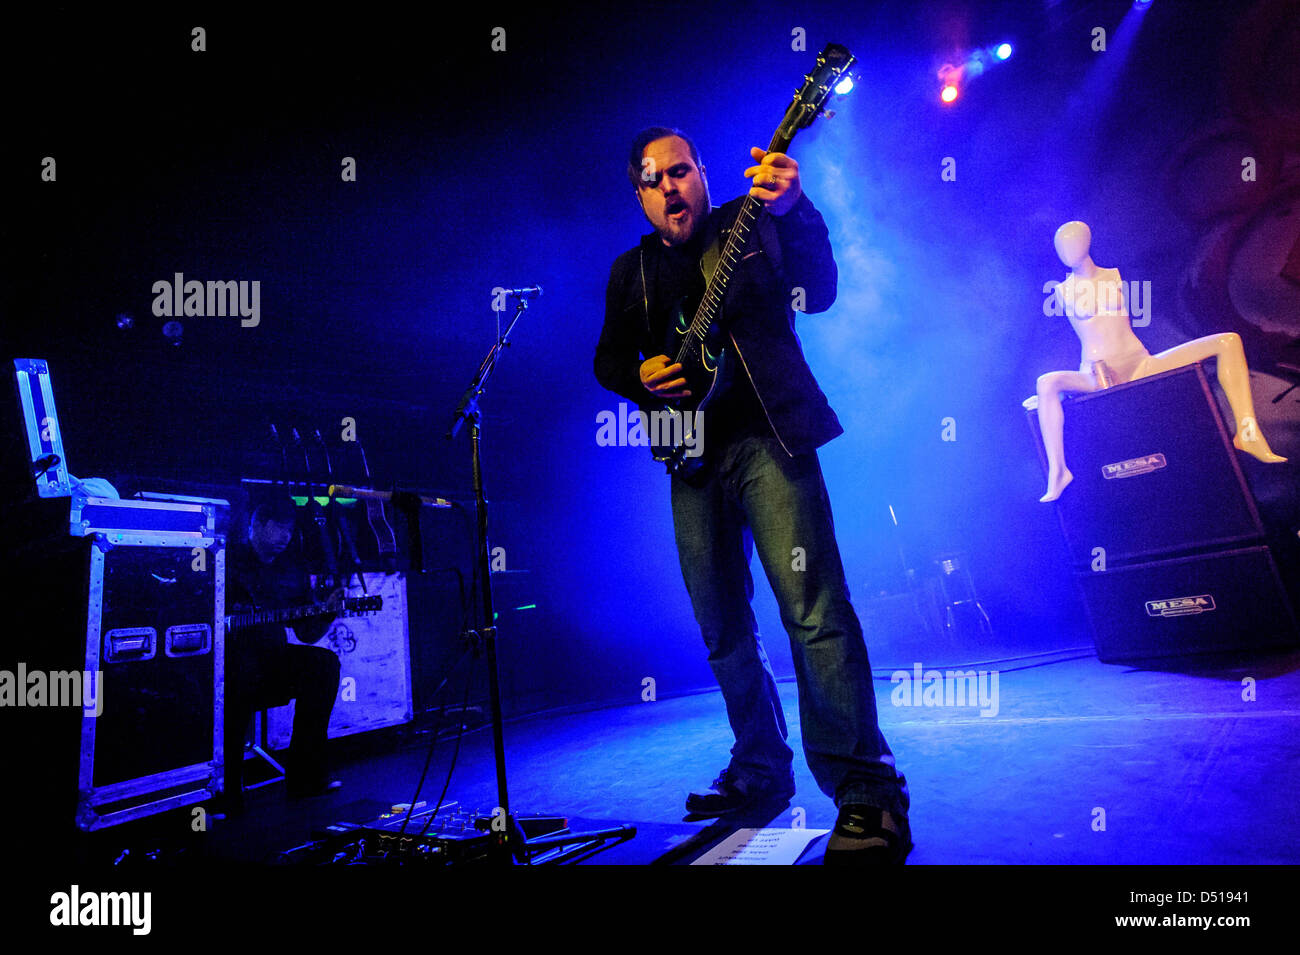 March 21, 2013 - Toronto, Ontario, Canada - American rock band 'Coheed and Cambria' performs on stage at Sound Academy in Toronto. In picture - guitarist TRAVIS STEVER (Credit Image: © Igor Vidyashev/ZUMAPRESS.com) Stock Photo